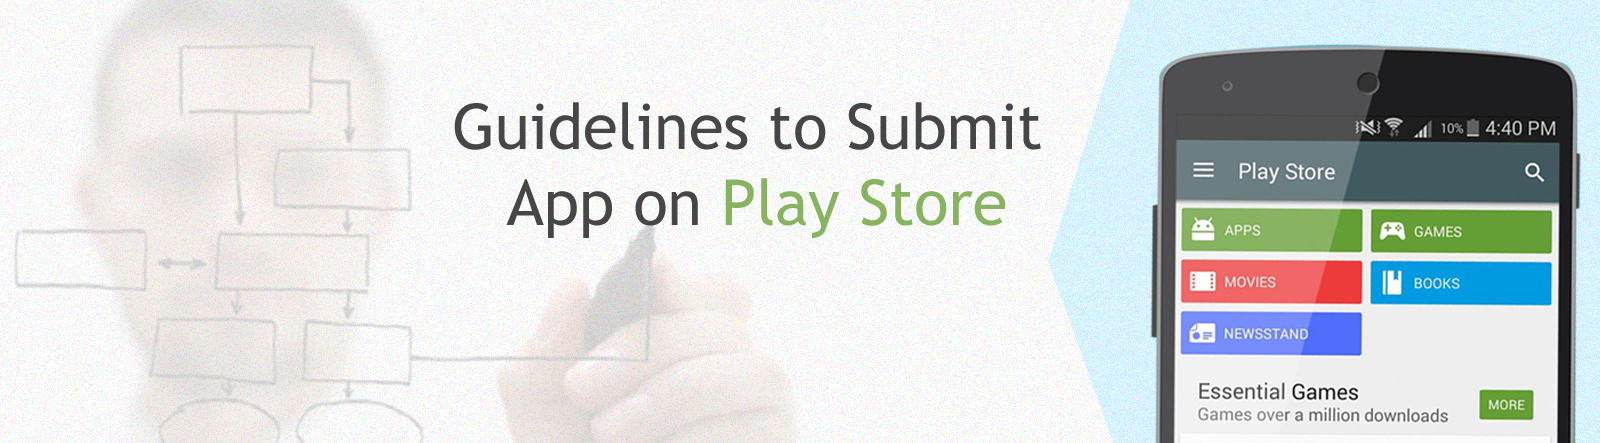 Guidelines to submit App on Play Store